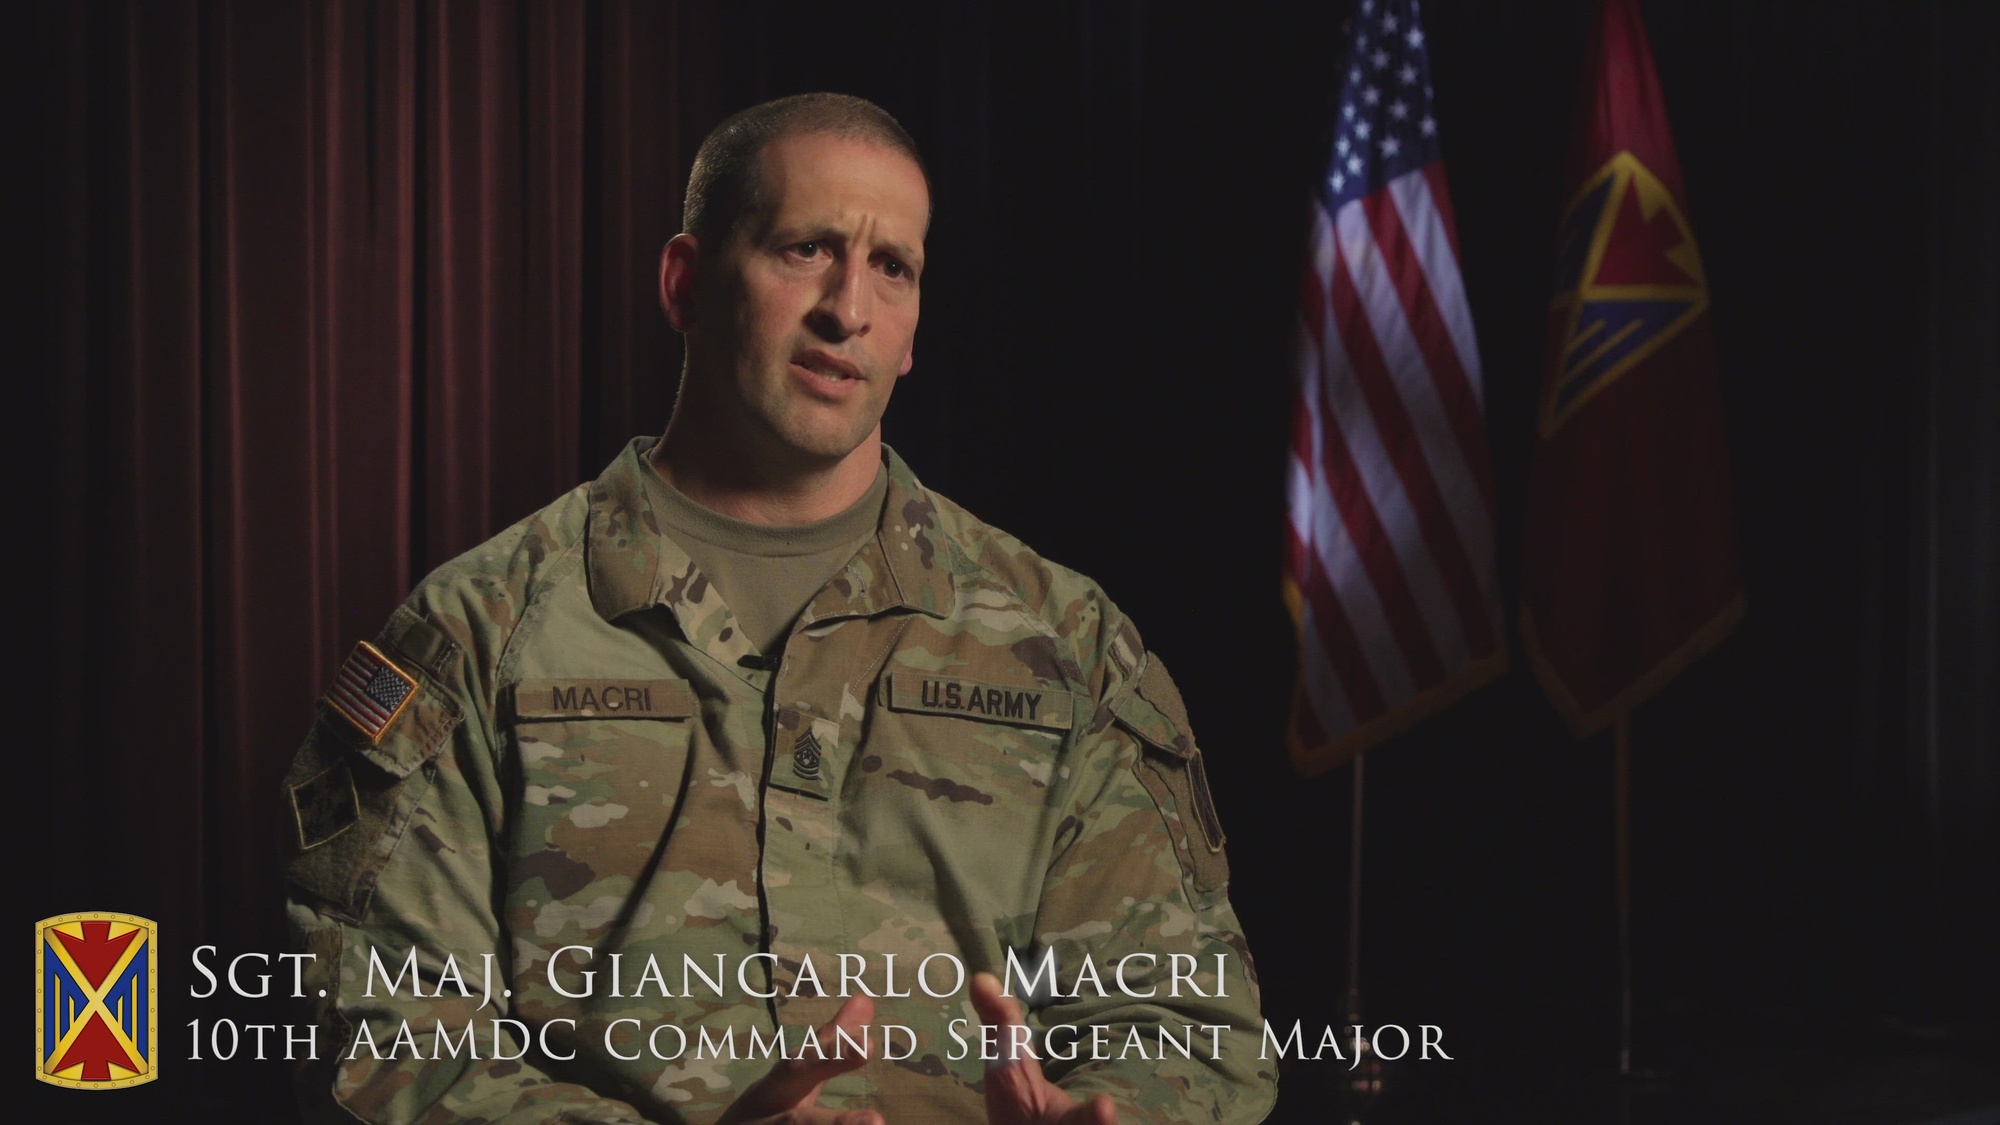 For our final suicide prevention month post, Command Sgt. Maj. Giancarlo Macri, 10th AAMDC Command Sergeant Major, emphasizes the importance of getting help when you need it Sept. 7 in Sembach, Germany. Just like your car's warning signals, listen to your body's as well! (U.S. Army video by Pfc. Yesenia Cadavid). If you’re thinking about suicide call 00-800-1273-8255 (in Europe). In the United States call 988 and press 1 for the Military Crisis Line. The Lifeline provides 24/7, free and confidential support for people in distress, prevention and crisis resources for you or your loved ones.